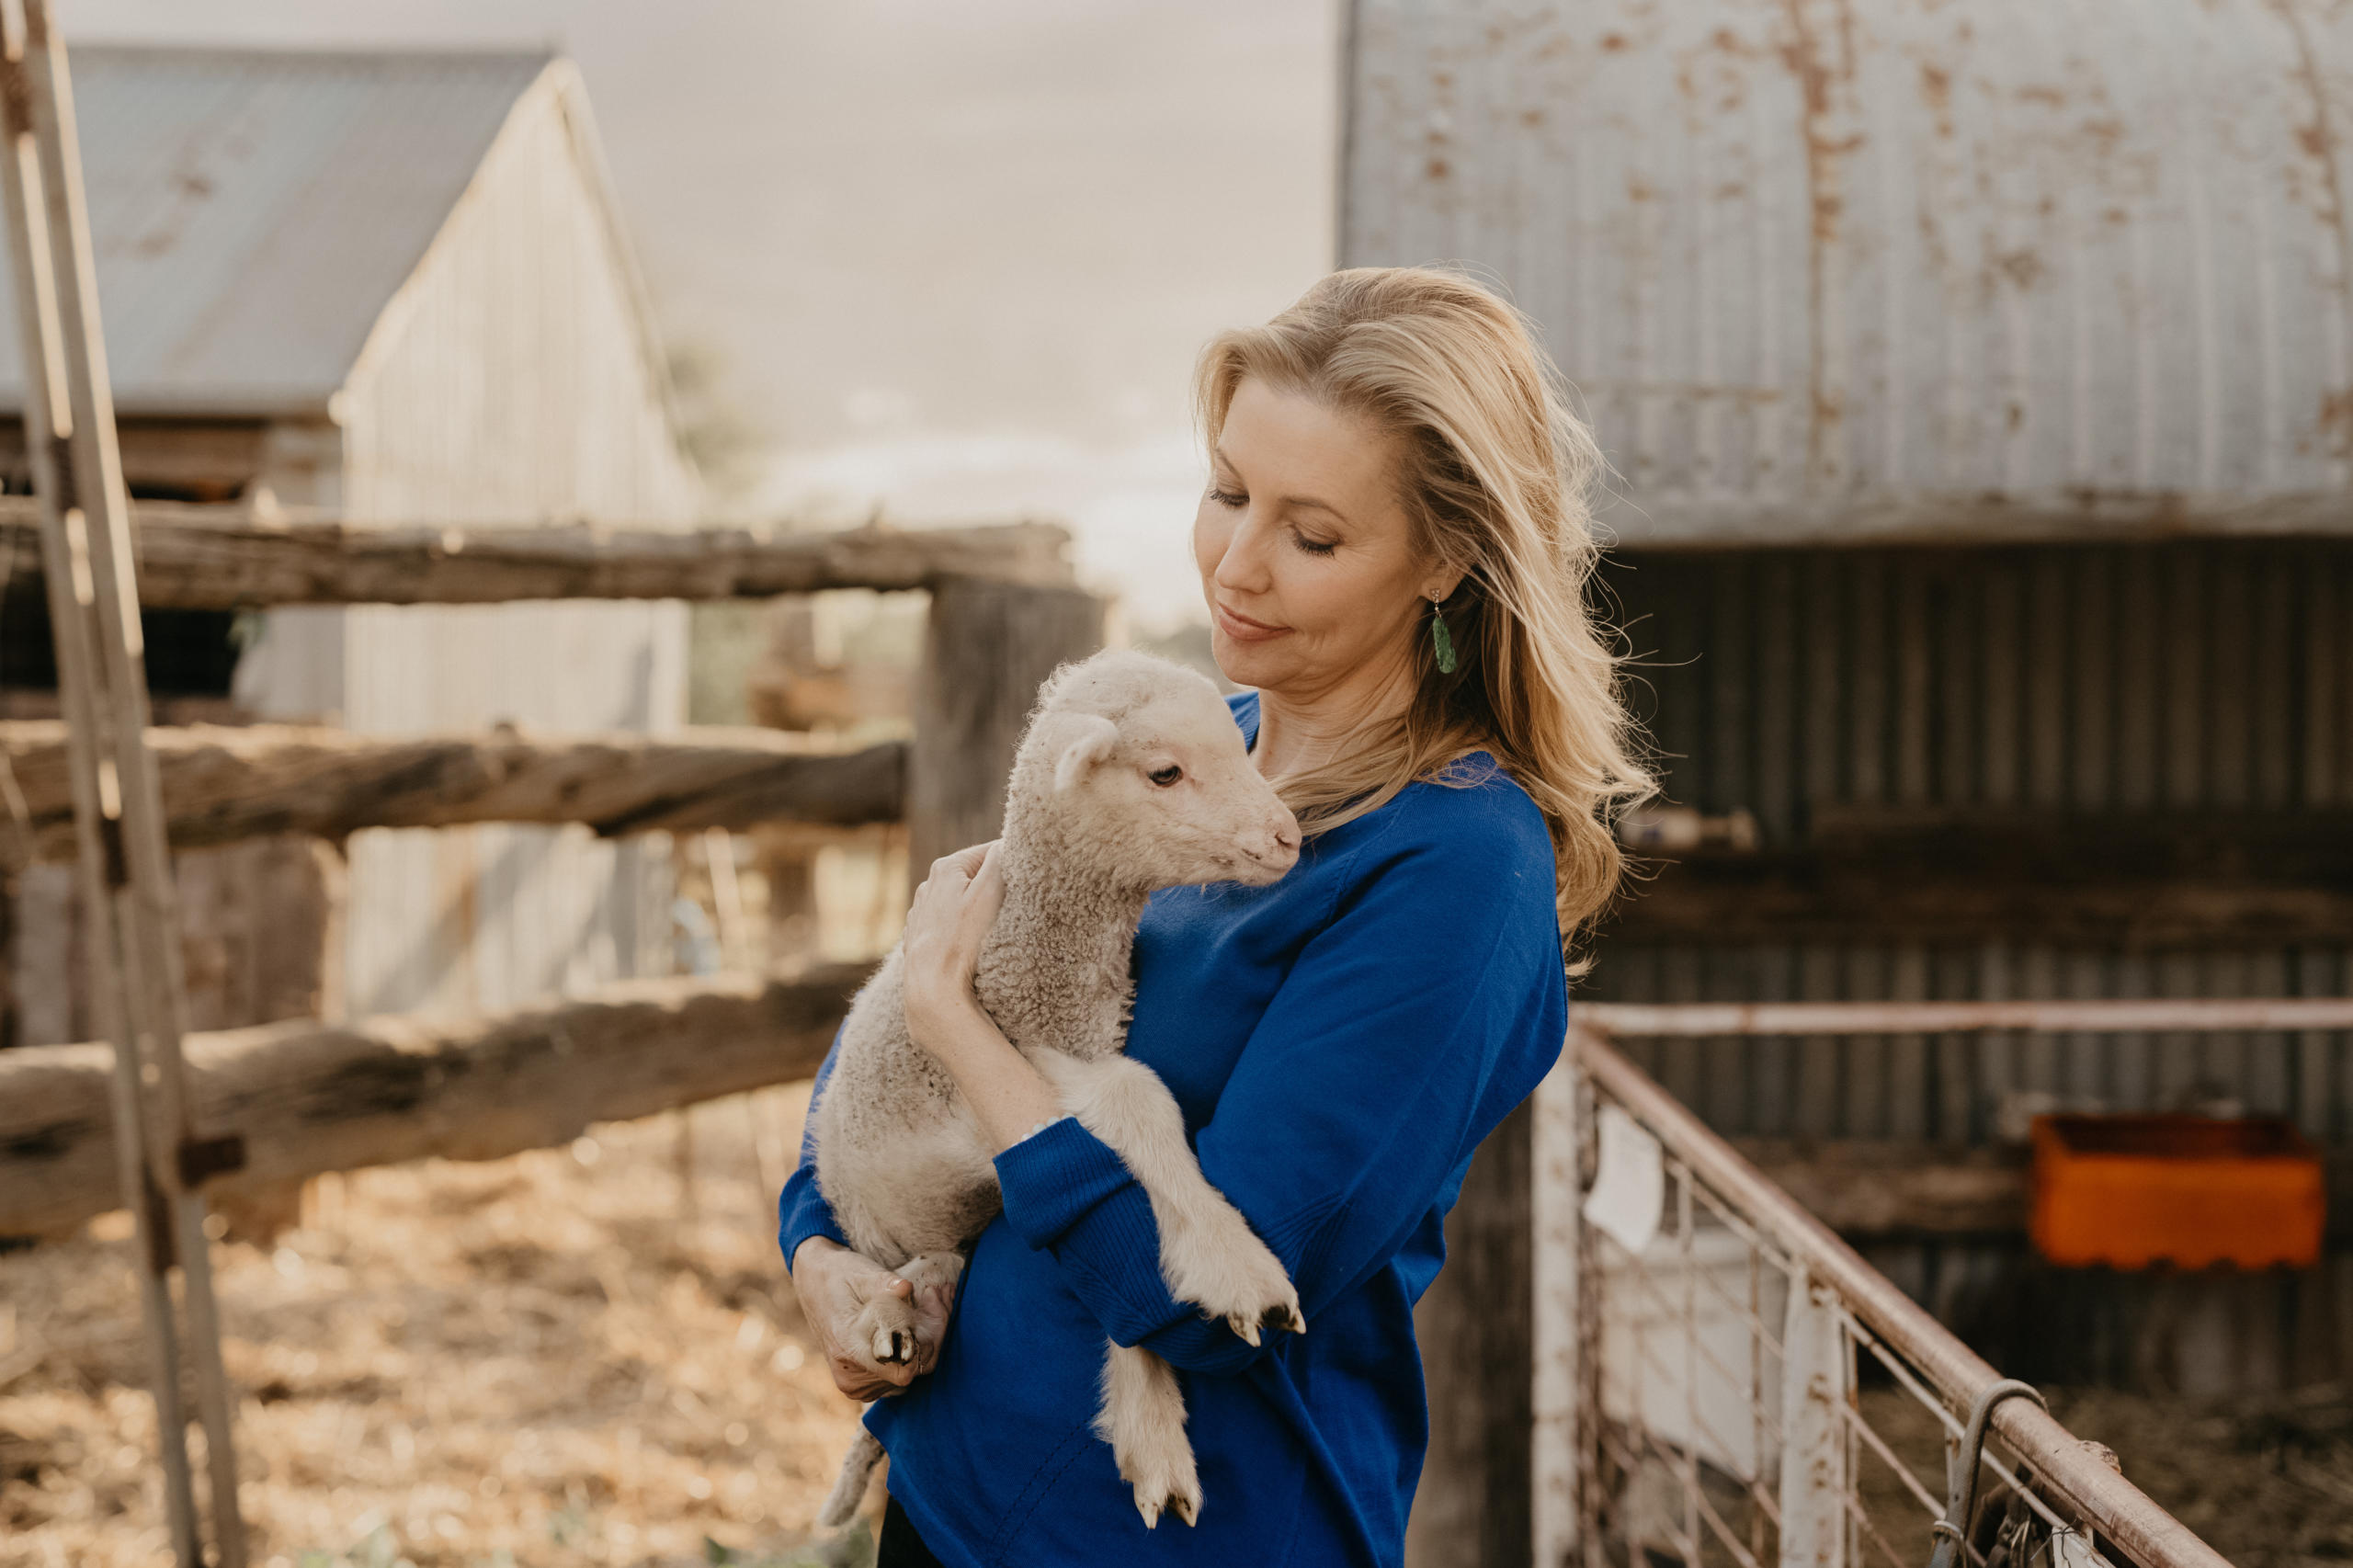 Long-time friend of Blue Illusion and media personality Catriona Rowntree visited Andrew, Jodie and Tom Green from Aloeburn Merinos to take Blue Illusion’s customers on an educational adventure. Photo credit: Blue Illusion